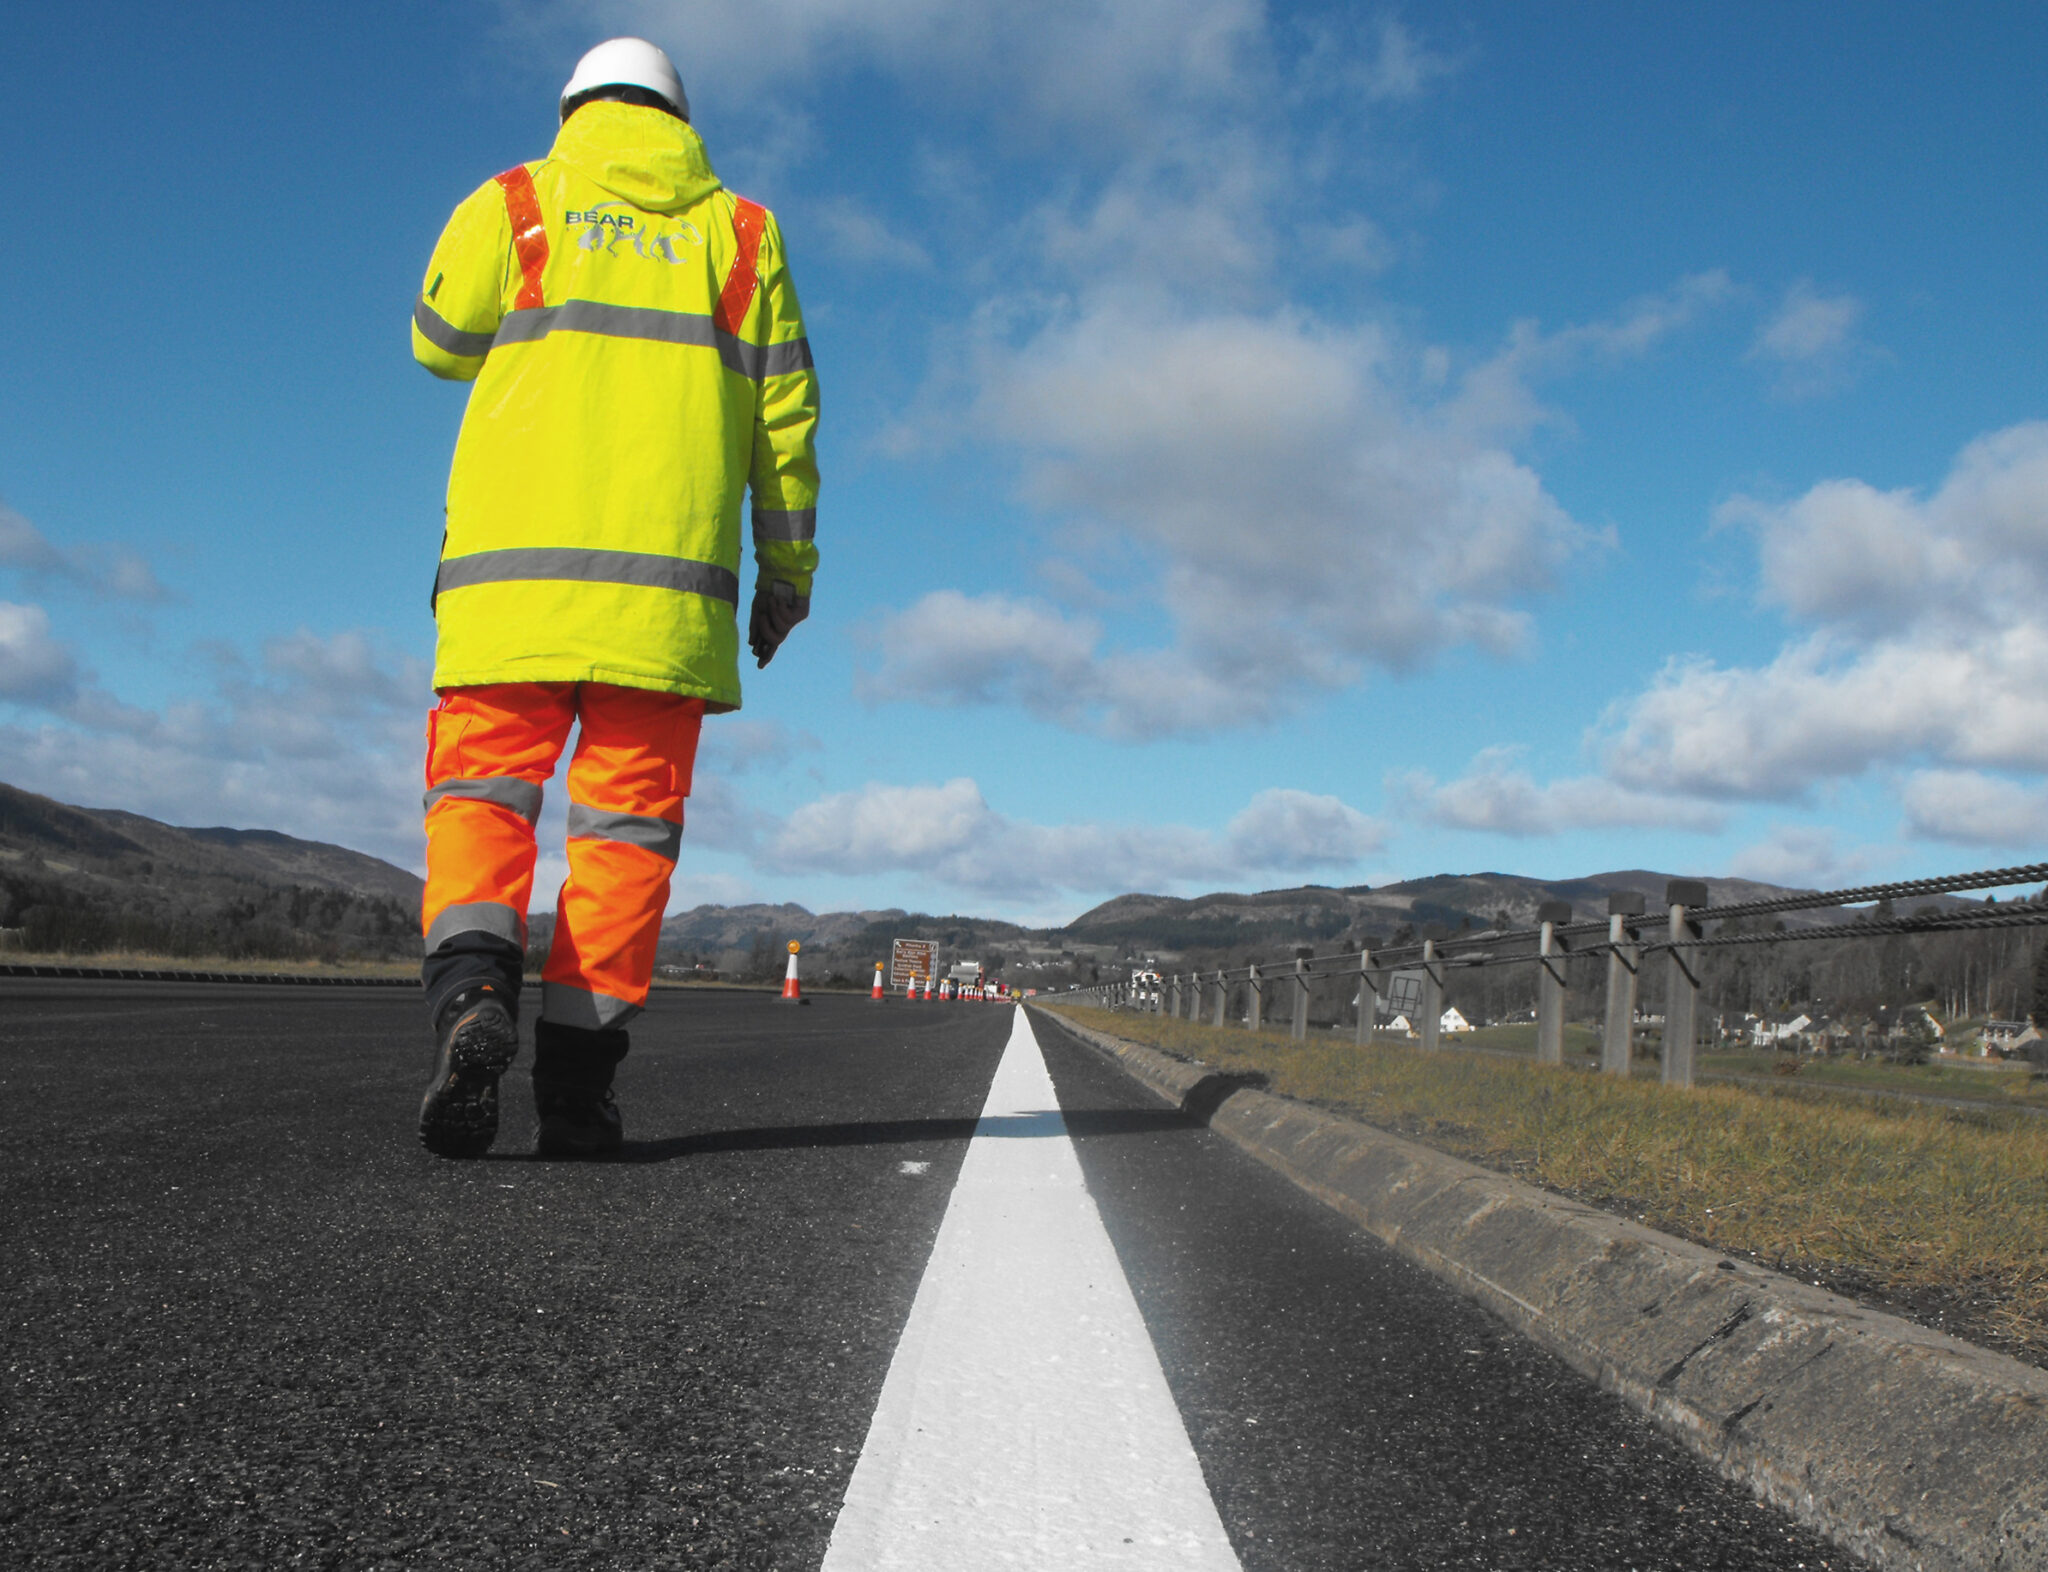 ESSENTIAL LINING IMPROVEMENTS PLANNED FOR A9 AT DRUMOCHTER